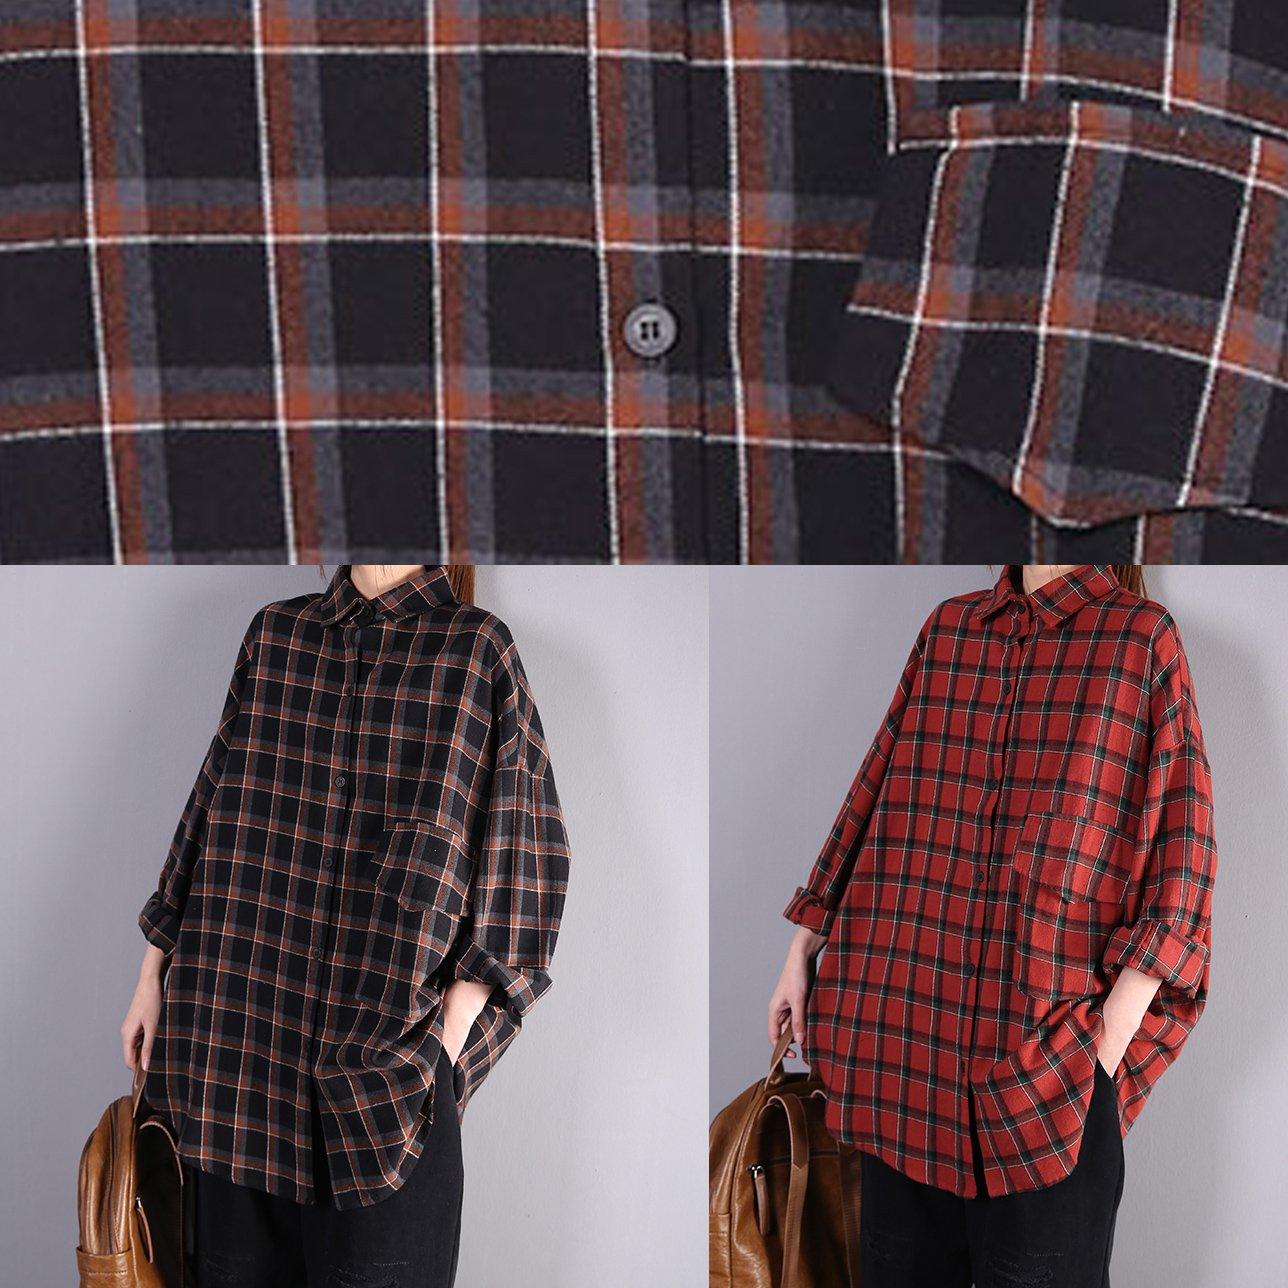 Art red plaid cotton clothes lapel pockets oversized shirts - Omychic